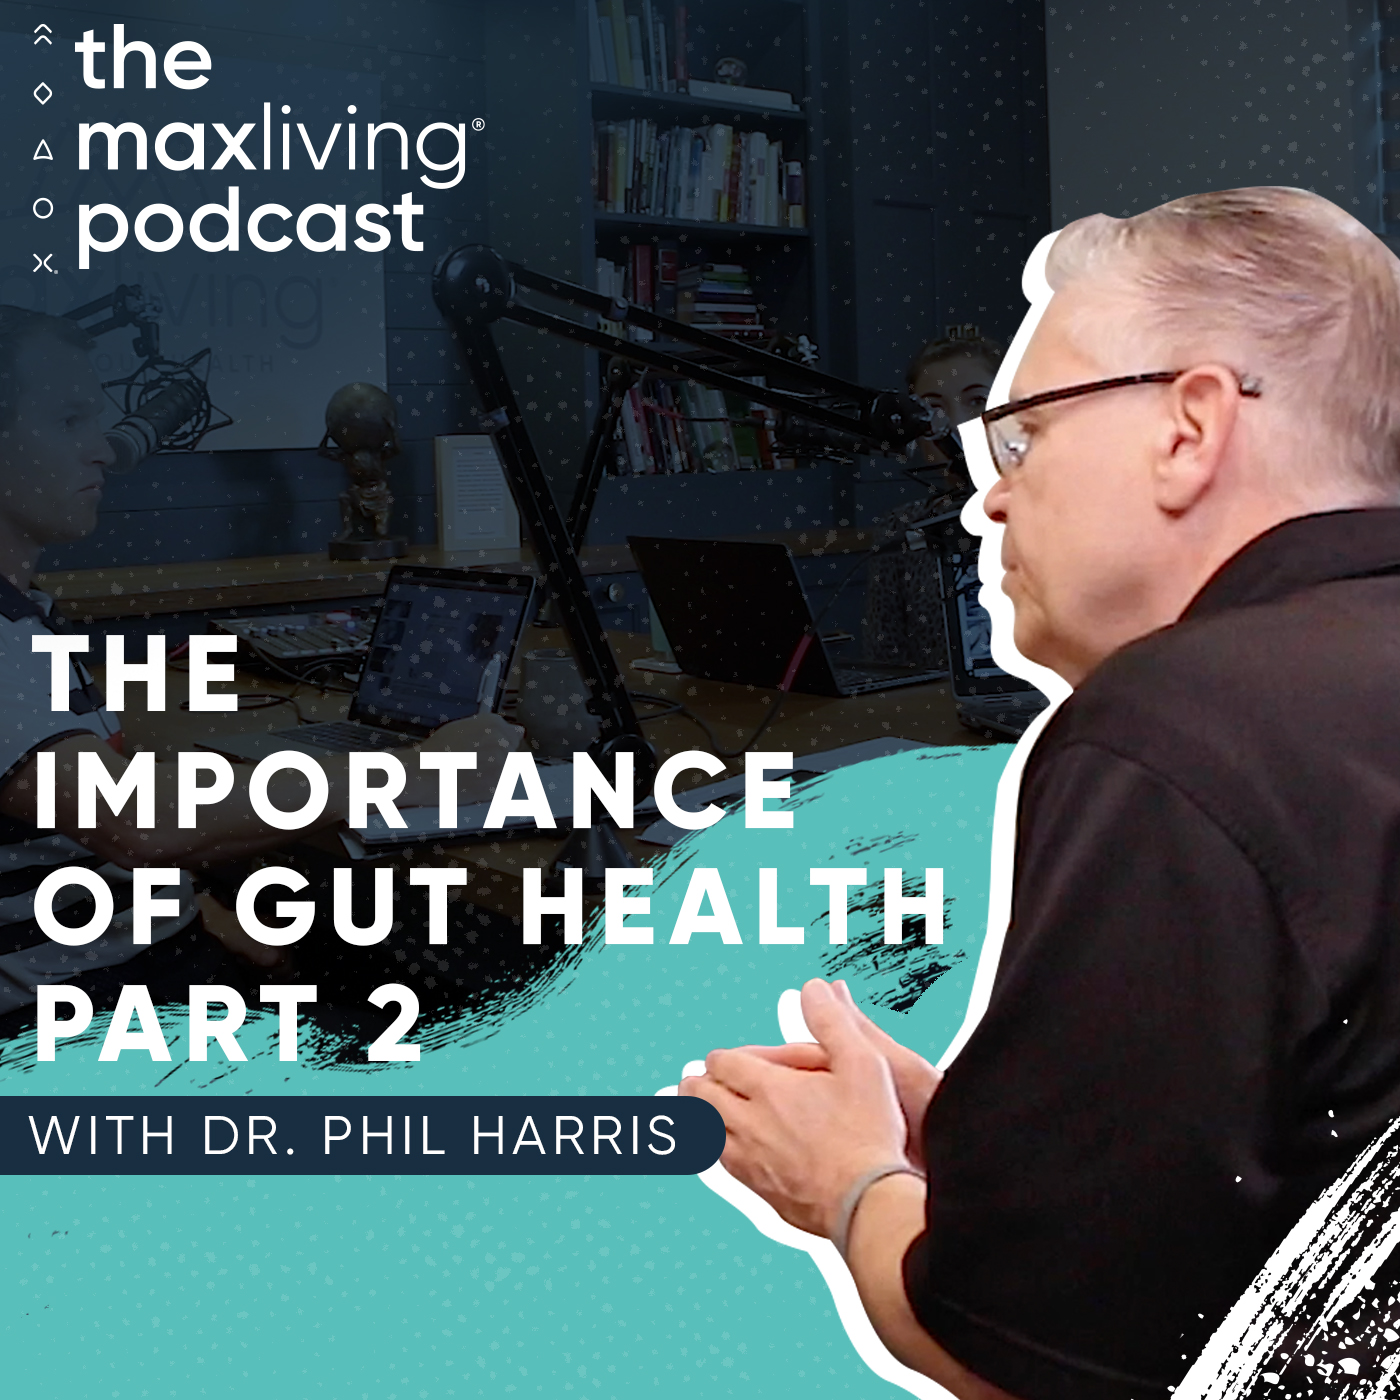 Episode 19 - The Importance of Gut Health Part 2